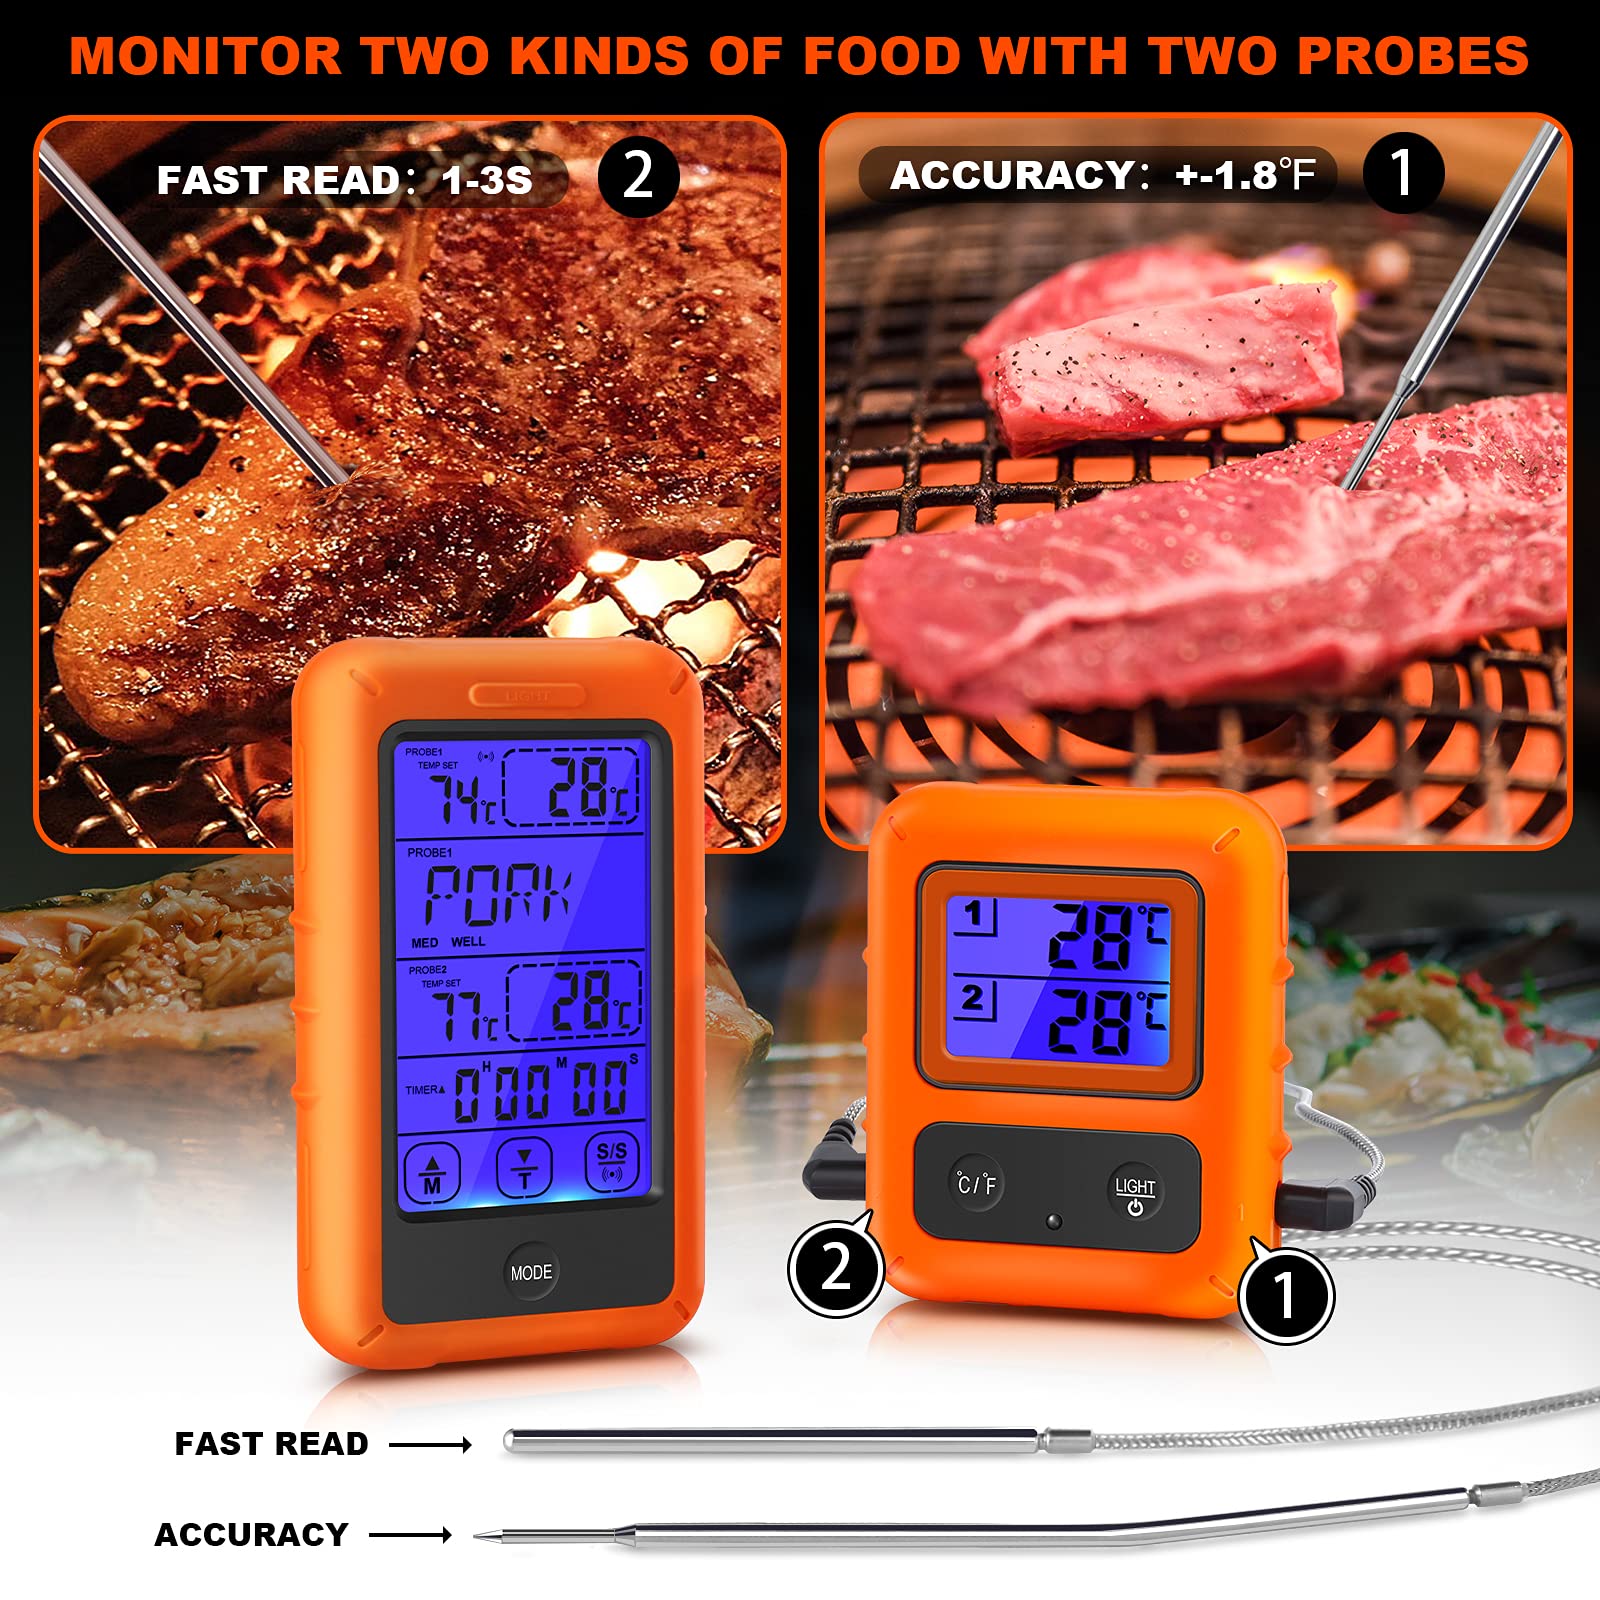 Wireless Meat Thermometer, Digital Meat Thermometer for Cooking, Instant Read Food Thermometer with 2 Stainless Steel Probes for BBQ Grill Smoker Oven Kitchen